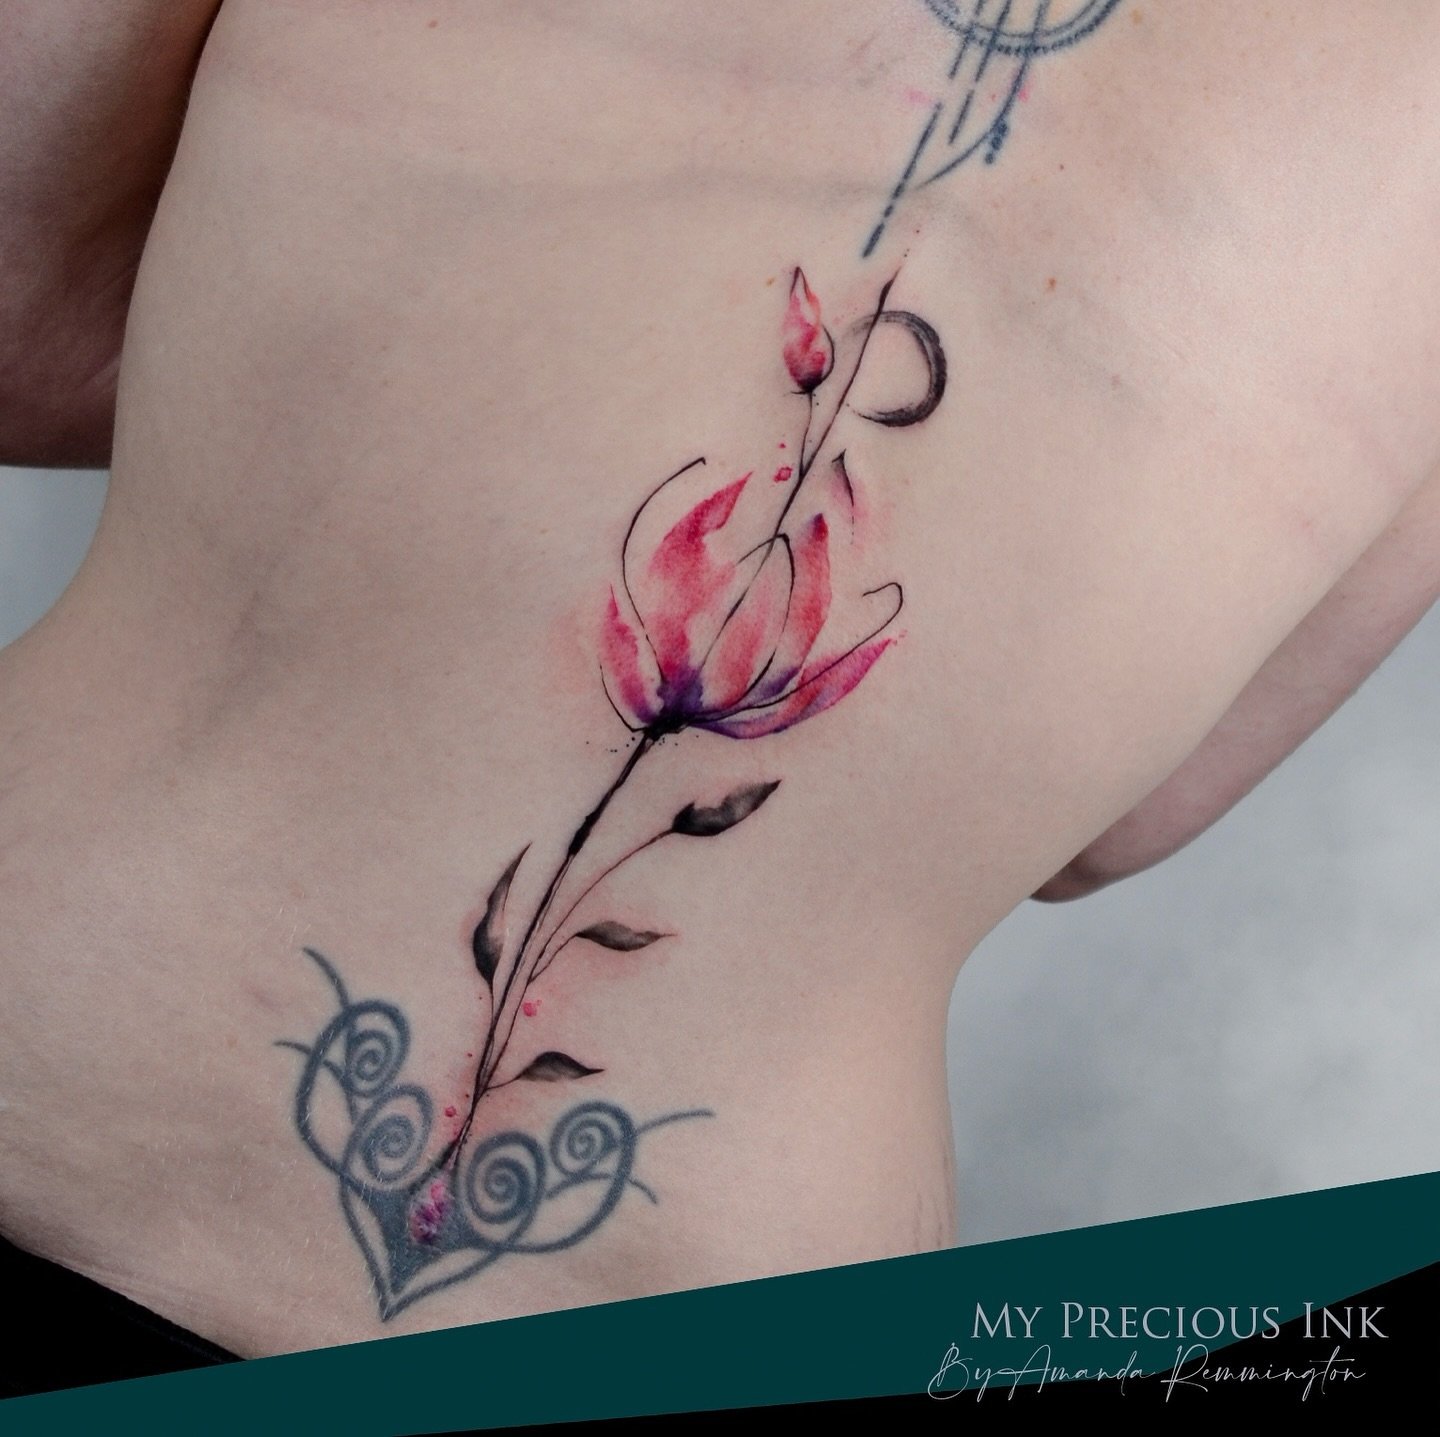 Coverd up a scar with this freehand floral design.
Do you have a scar that you want to get covered?

///&mdash;&mdash;&gt; www.mypreciousink.nl &lt;&mdash;&mdash;\\\

#Tattoo #watercolortattoo #watercolourtattoo #watercolor #thebesttattooartists #fre